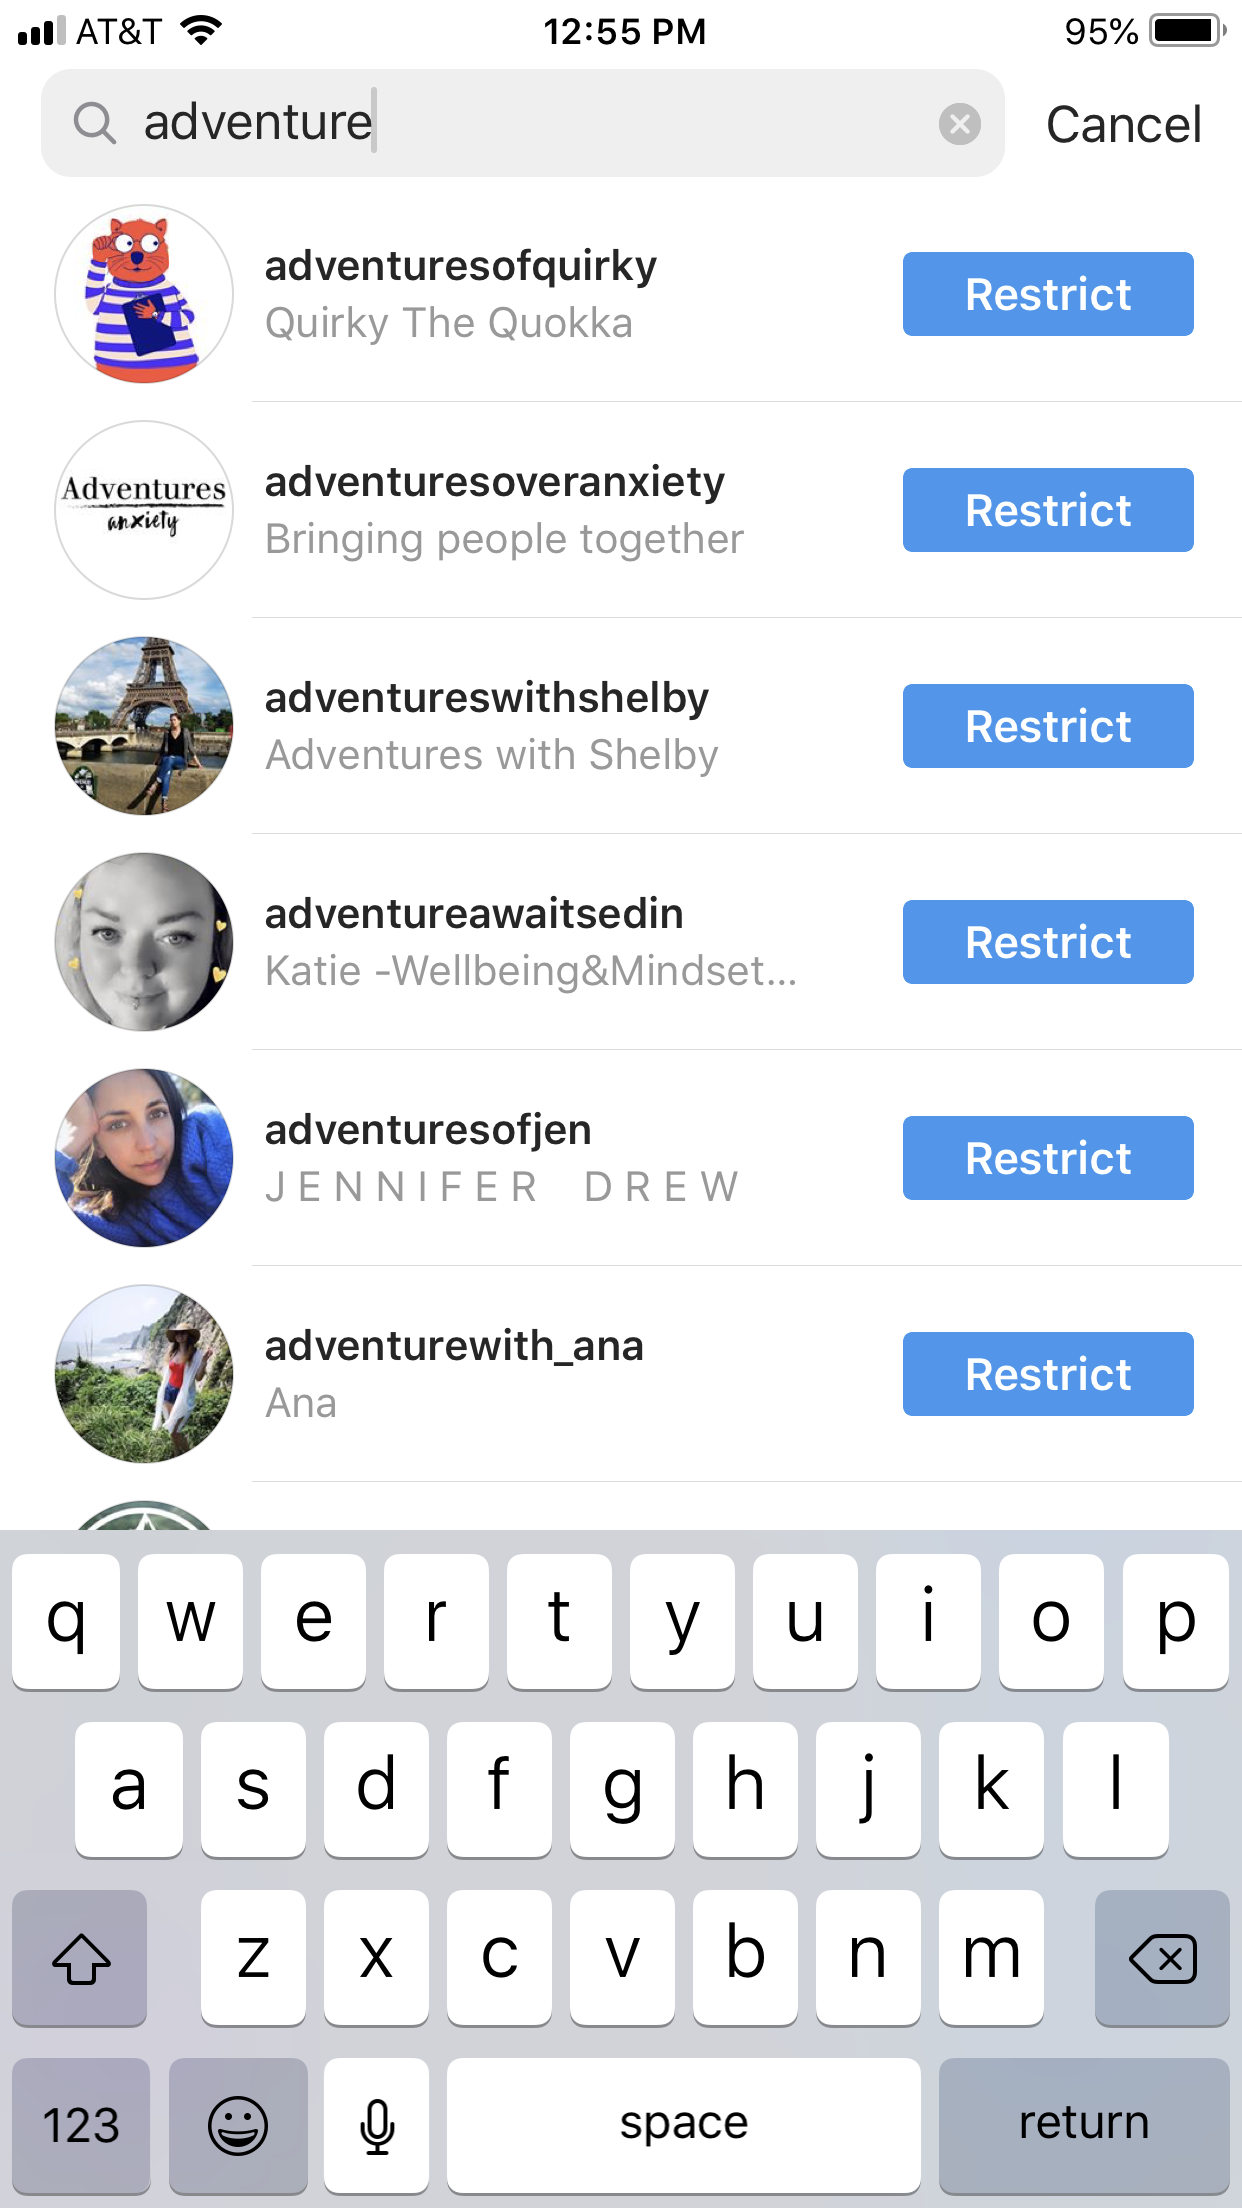 How to “Restrict” Comments and Accounts on Instagram